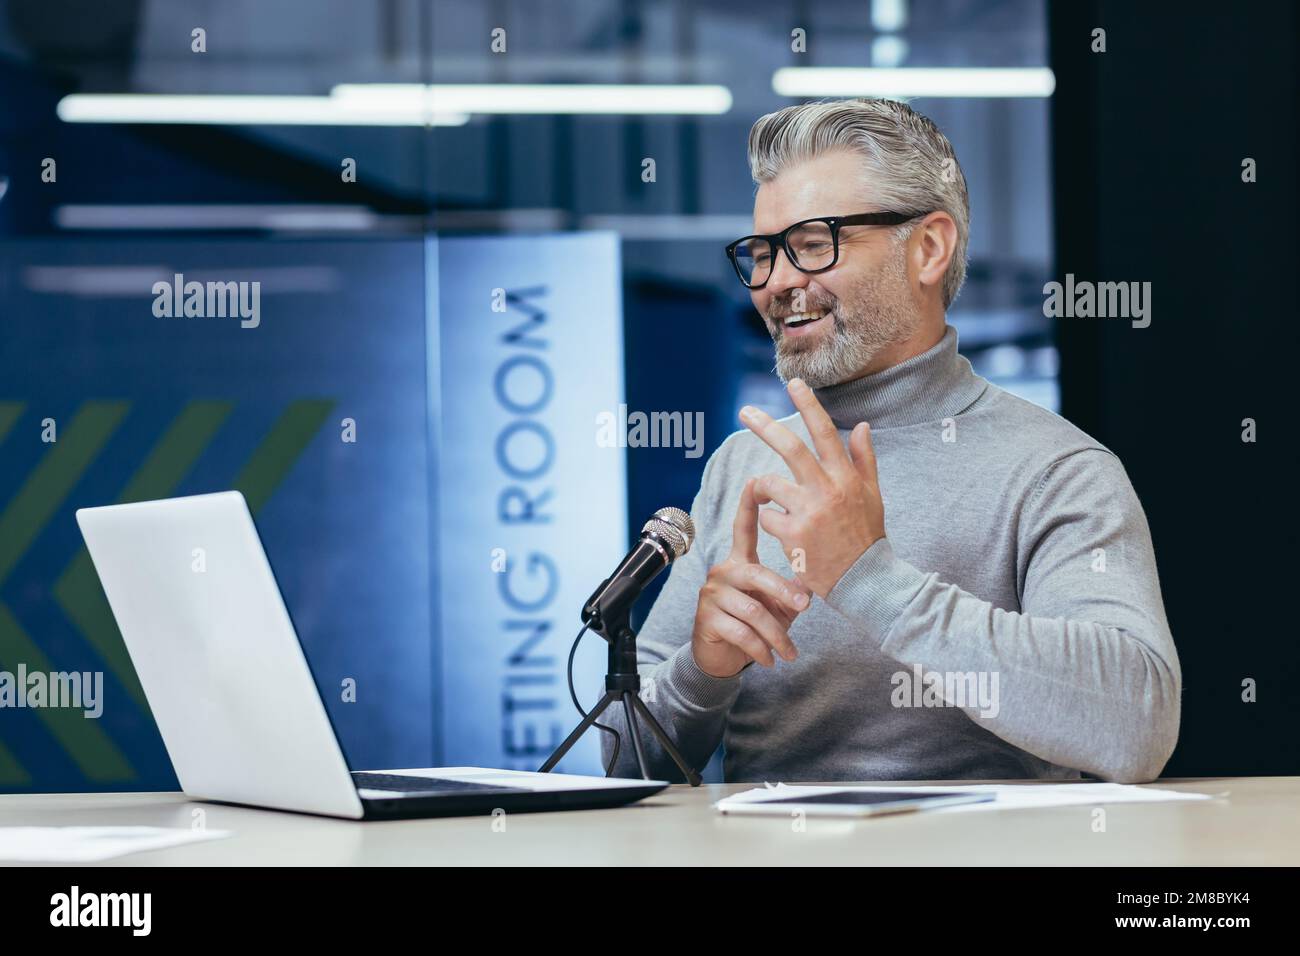 Senior gray-haired man sitting at a desk in an office with a microphone and laptop. Talks on a video call. Conducts interviews, business meetings, webinars, online meetings. Shows, counts on fingers. Stock Photo